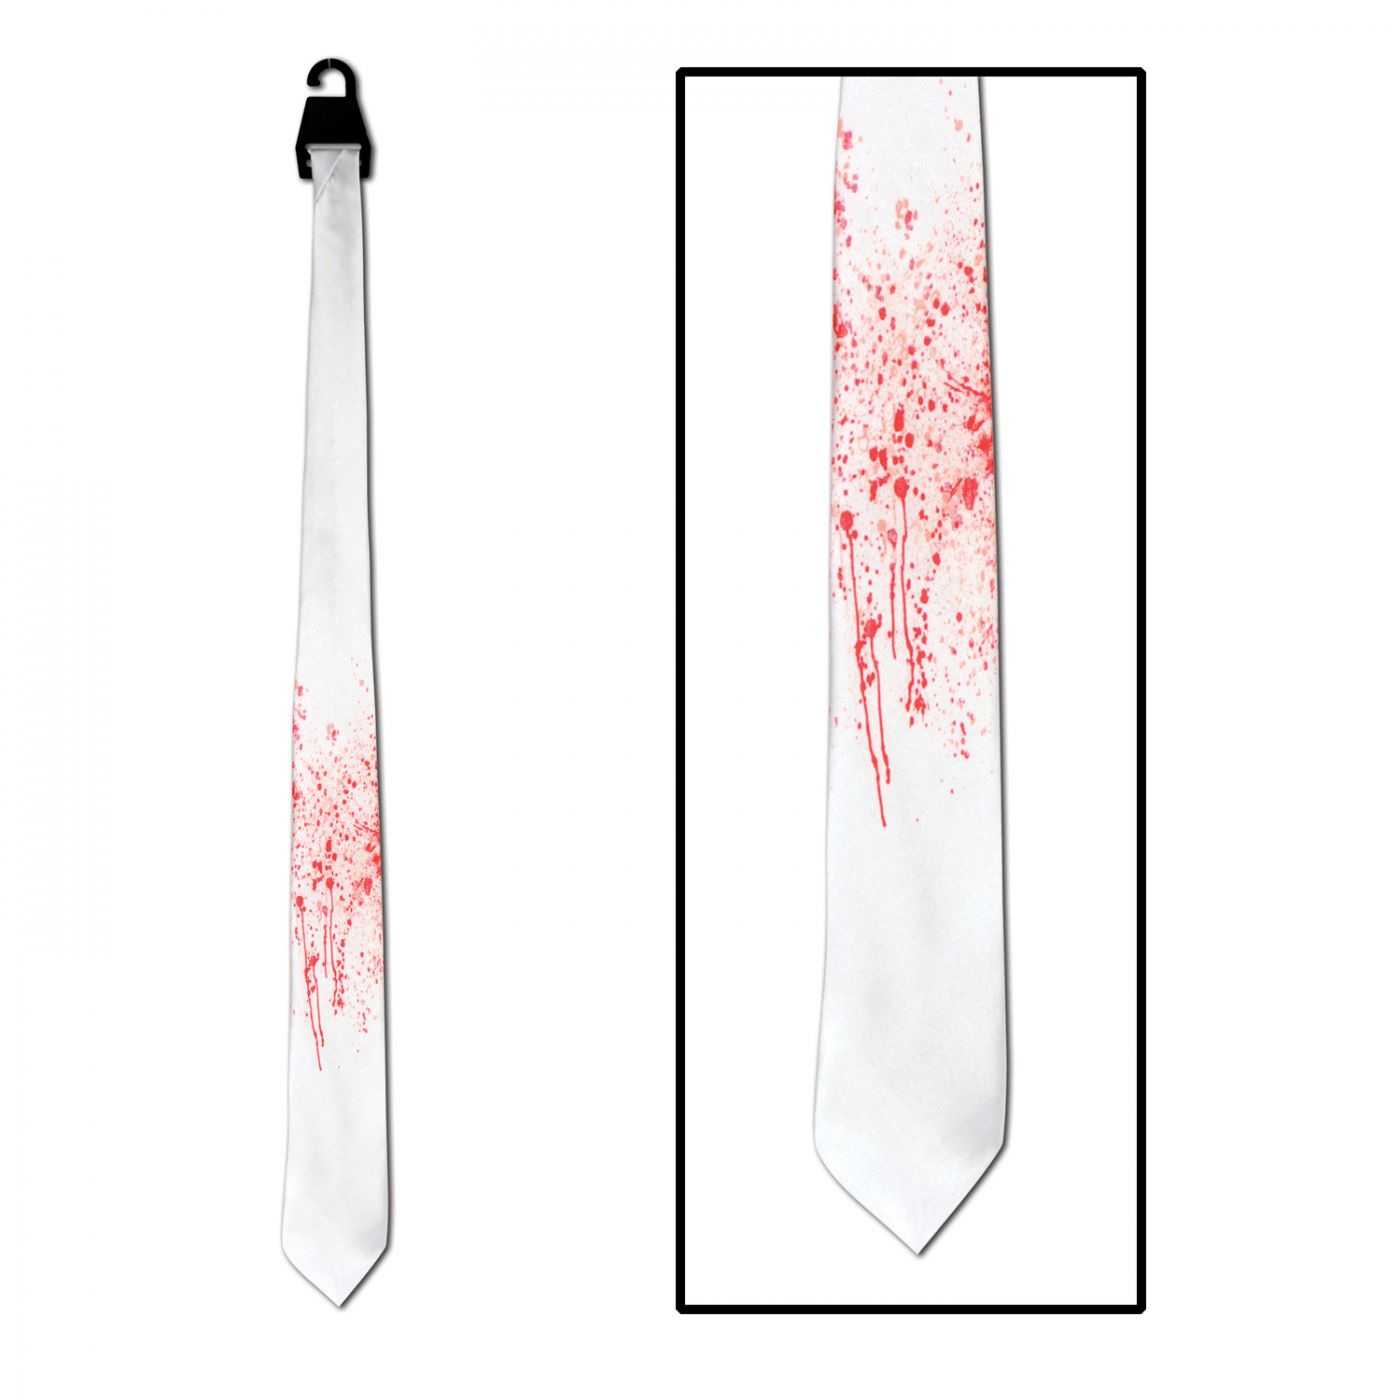 Image of Blood Spatter Tie (12)